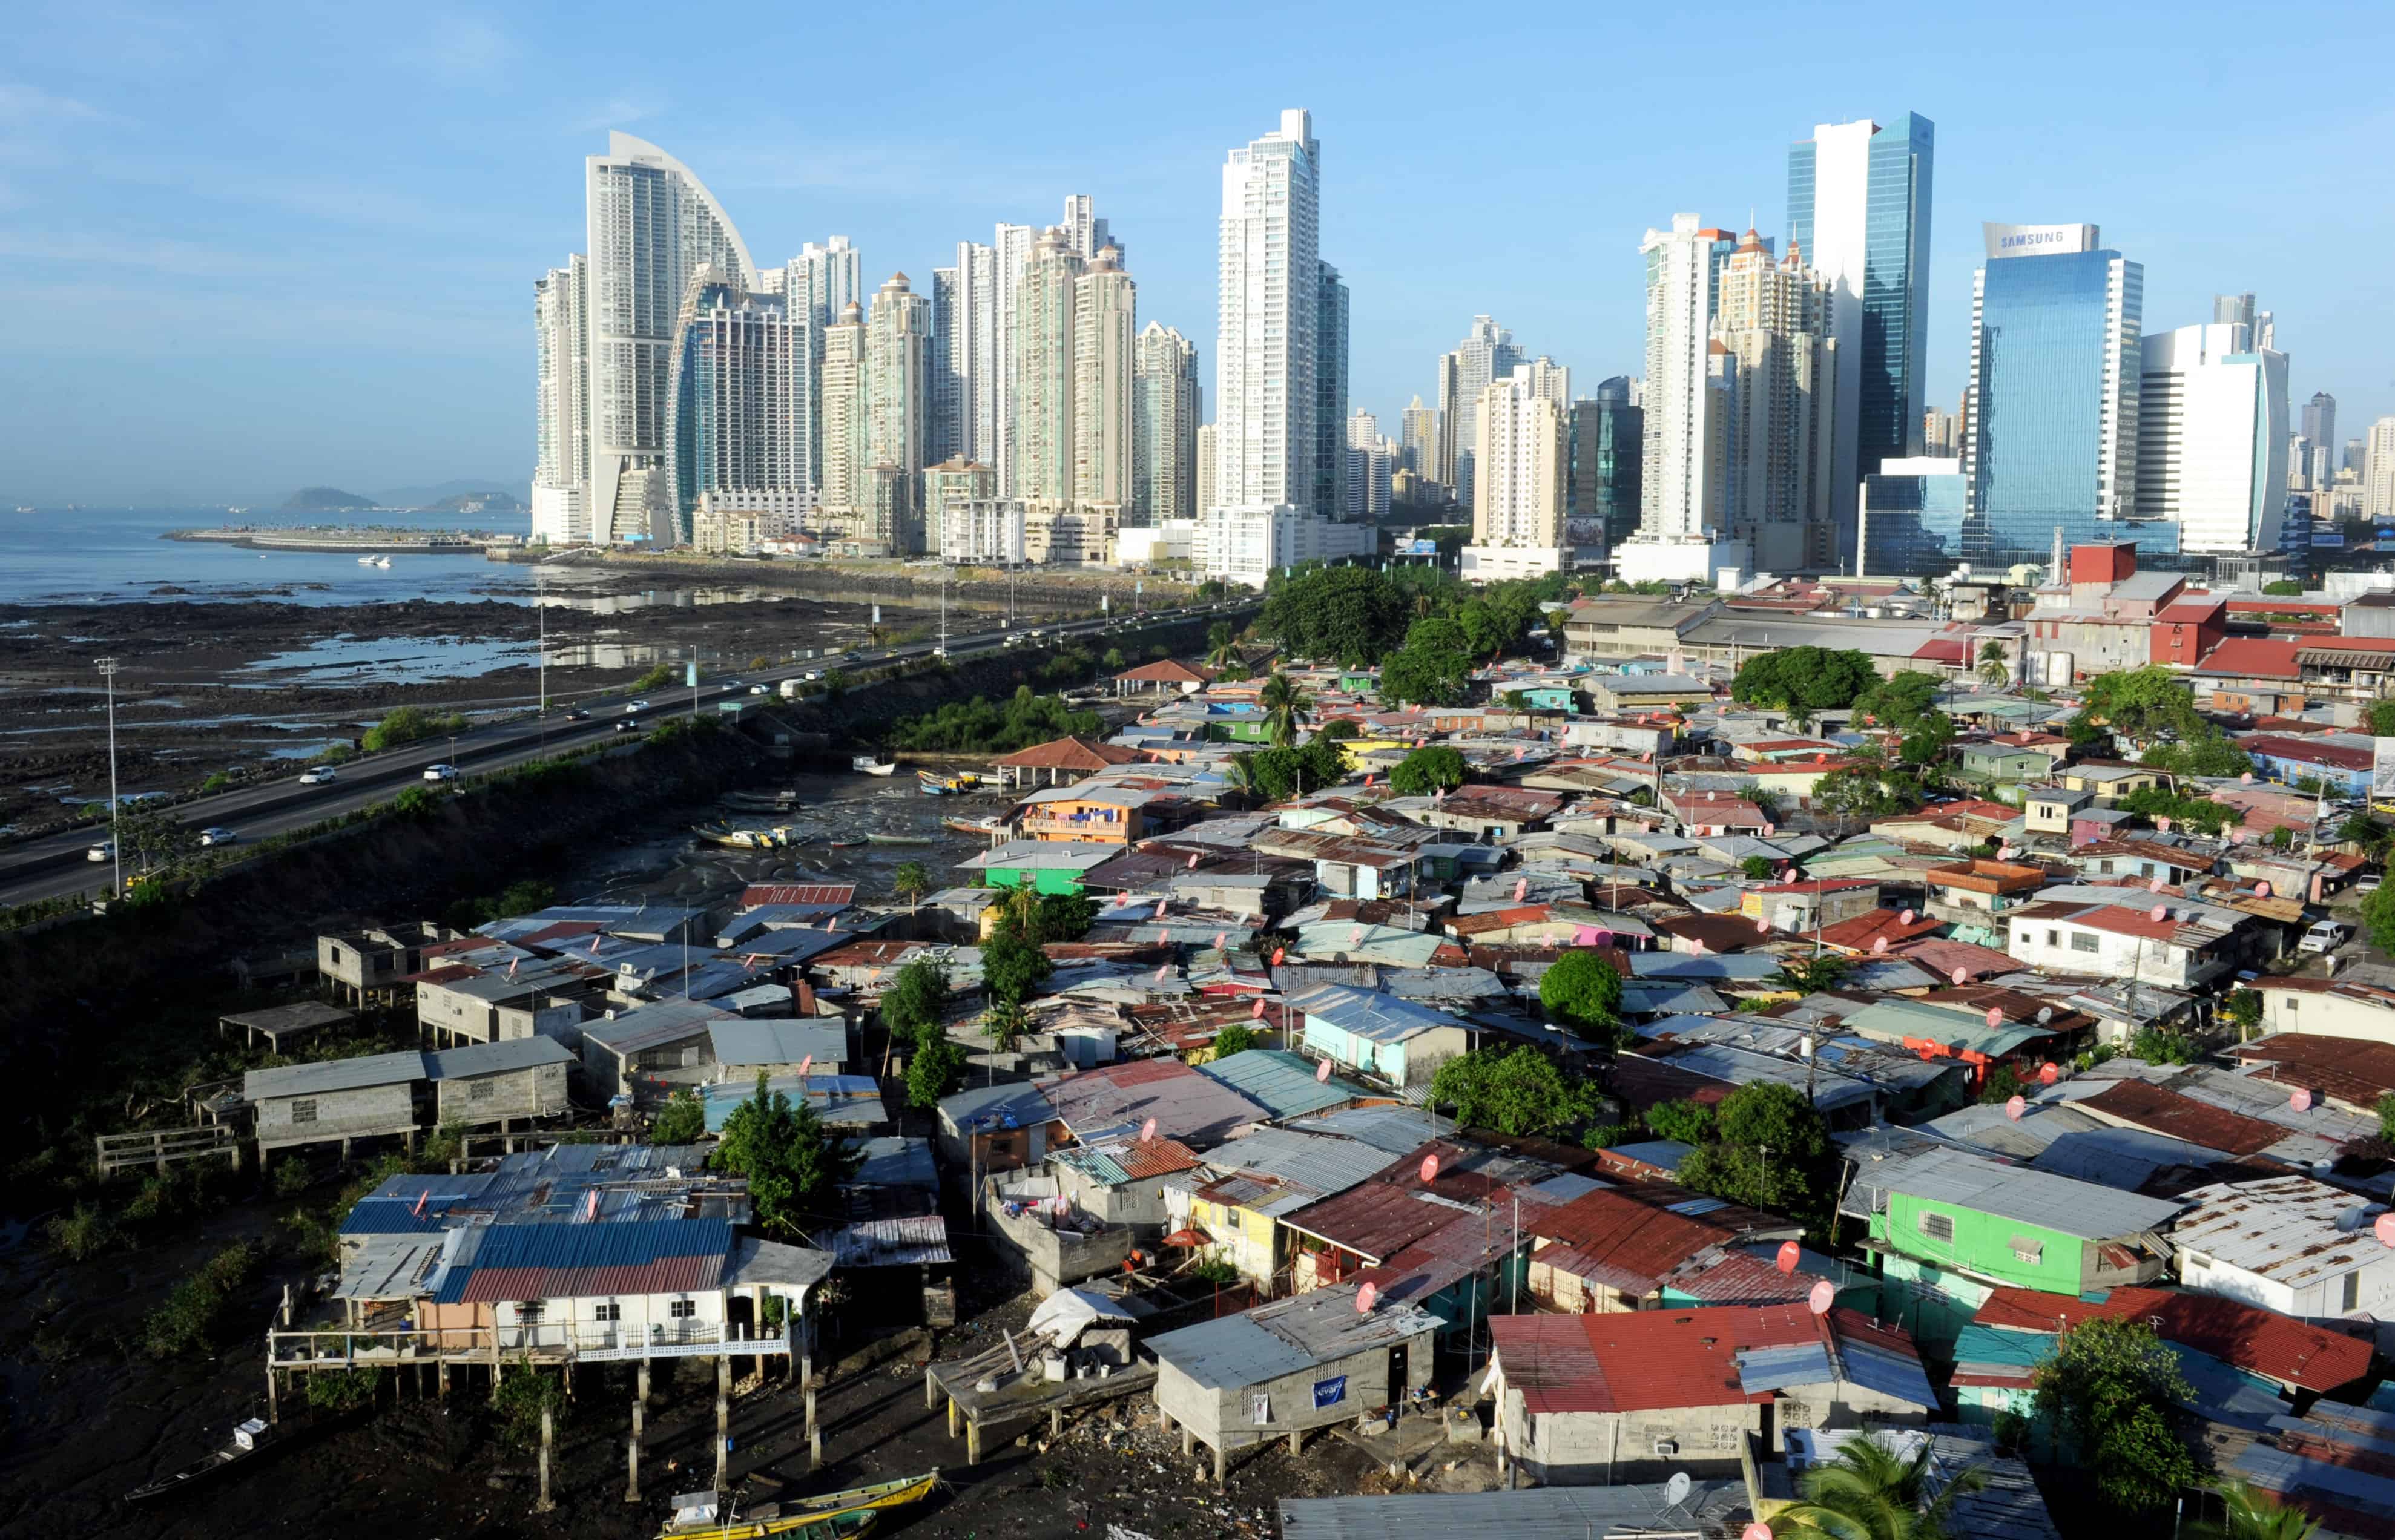 A view of the Punta Pacifica neighborhood, in Panama City, on April 24, 2013.